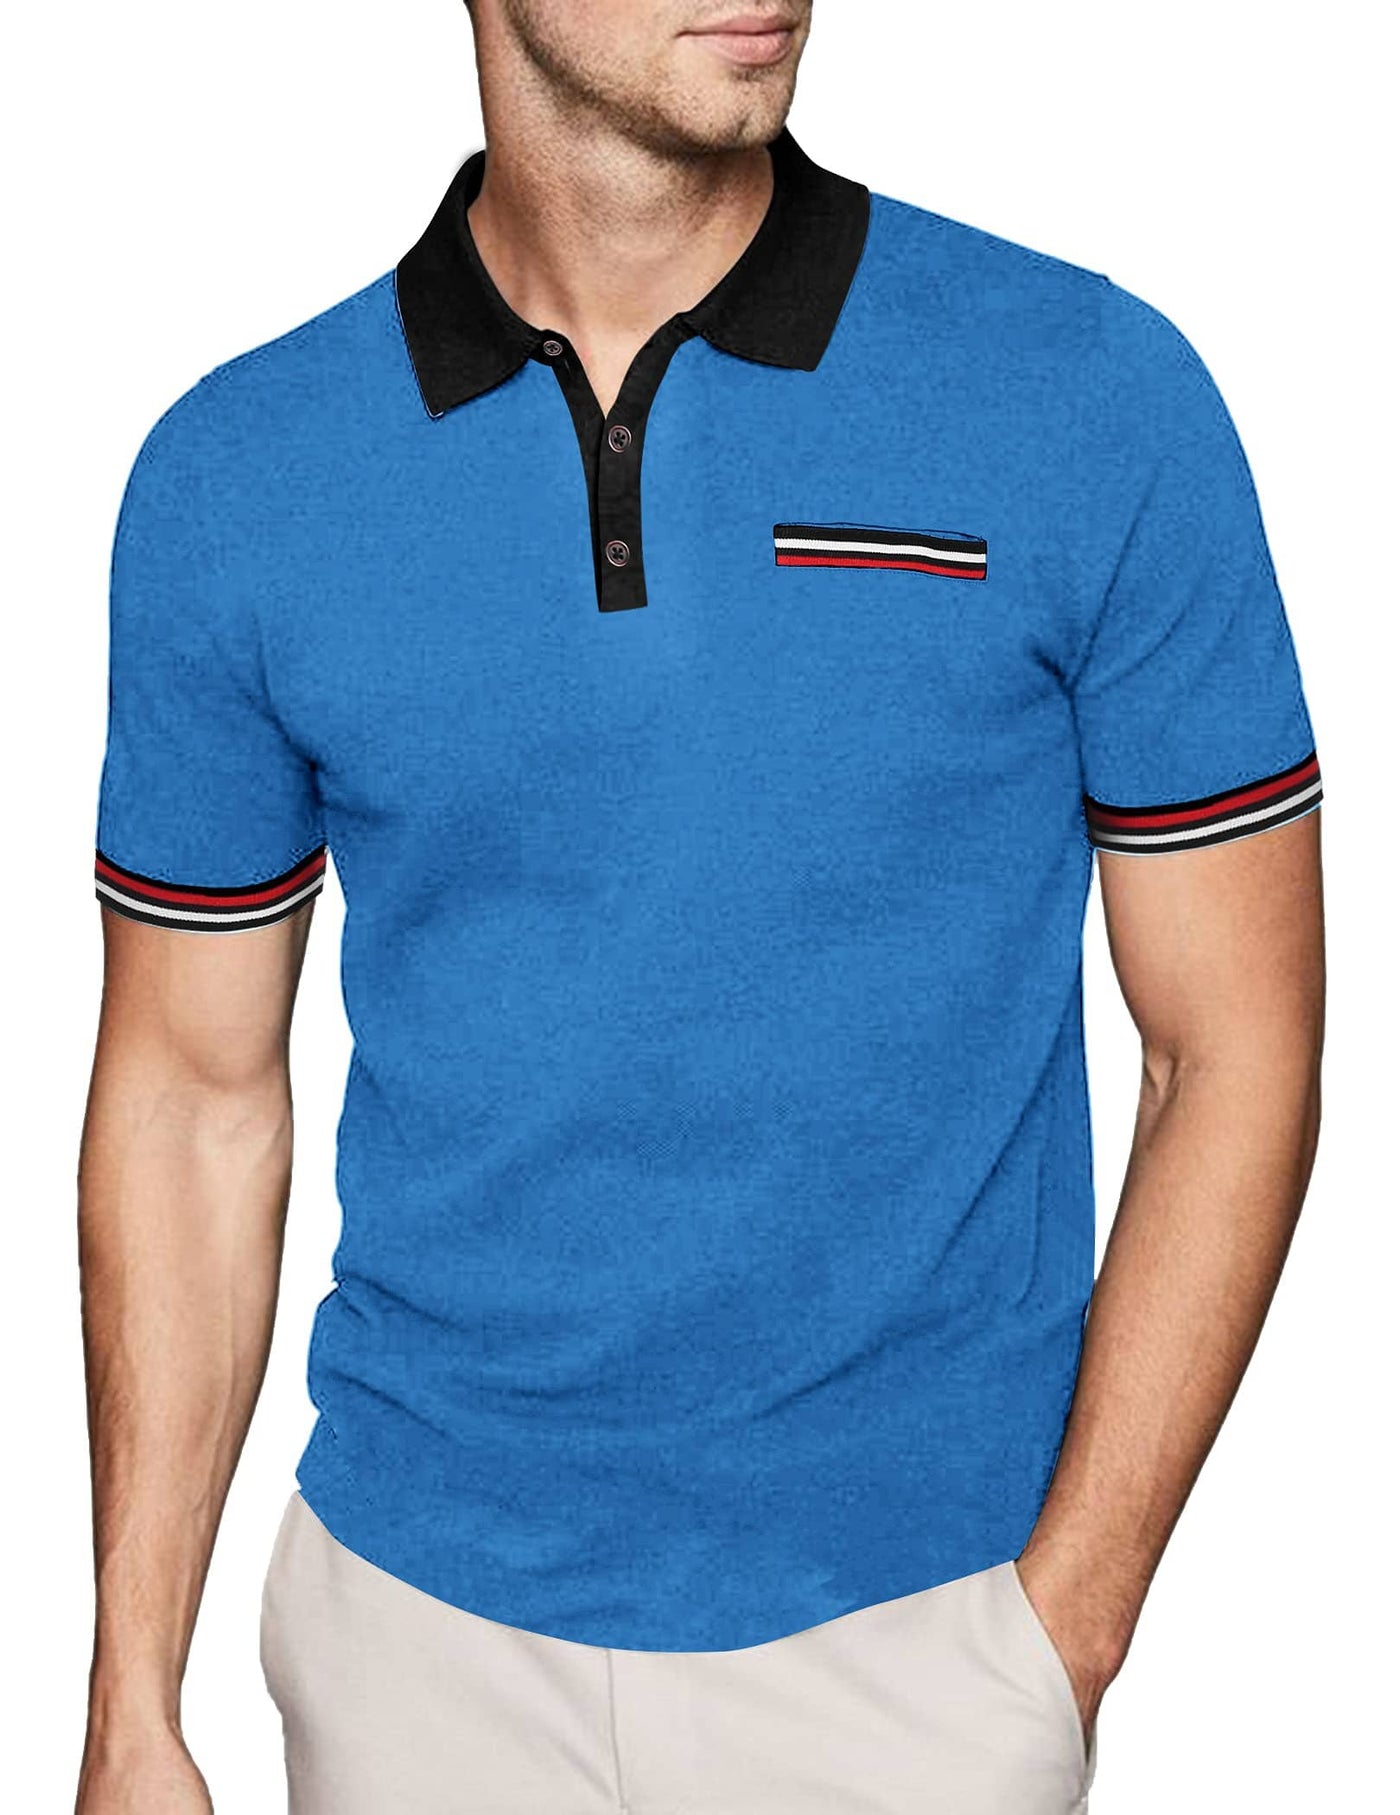 Coofandy Pocket Polo Shirt (US Only) Polos coofandy Blue S 